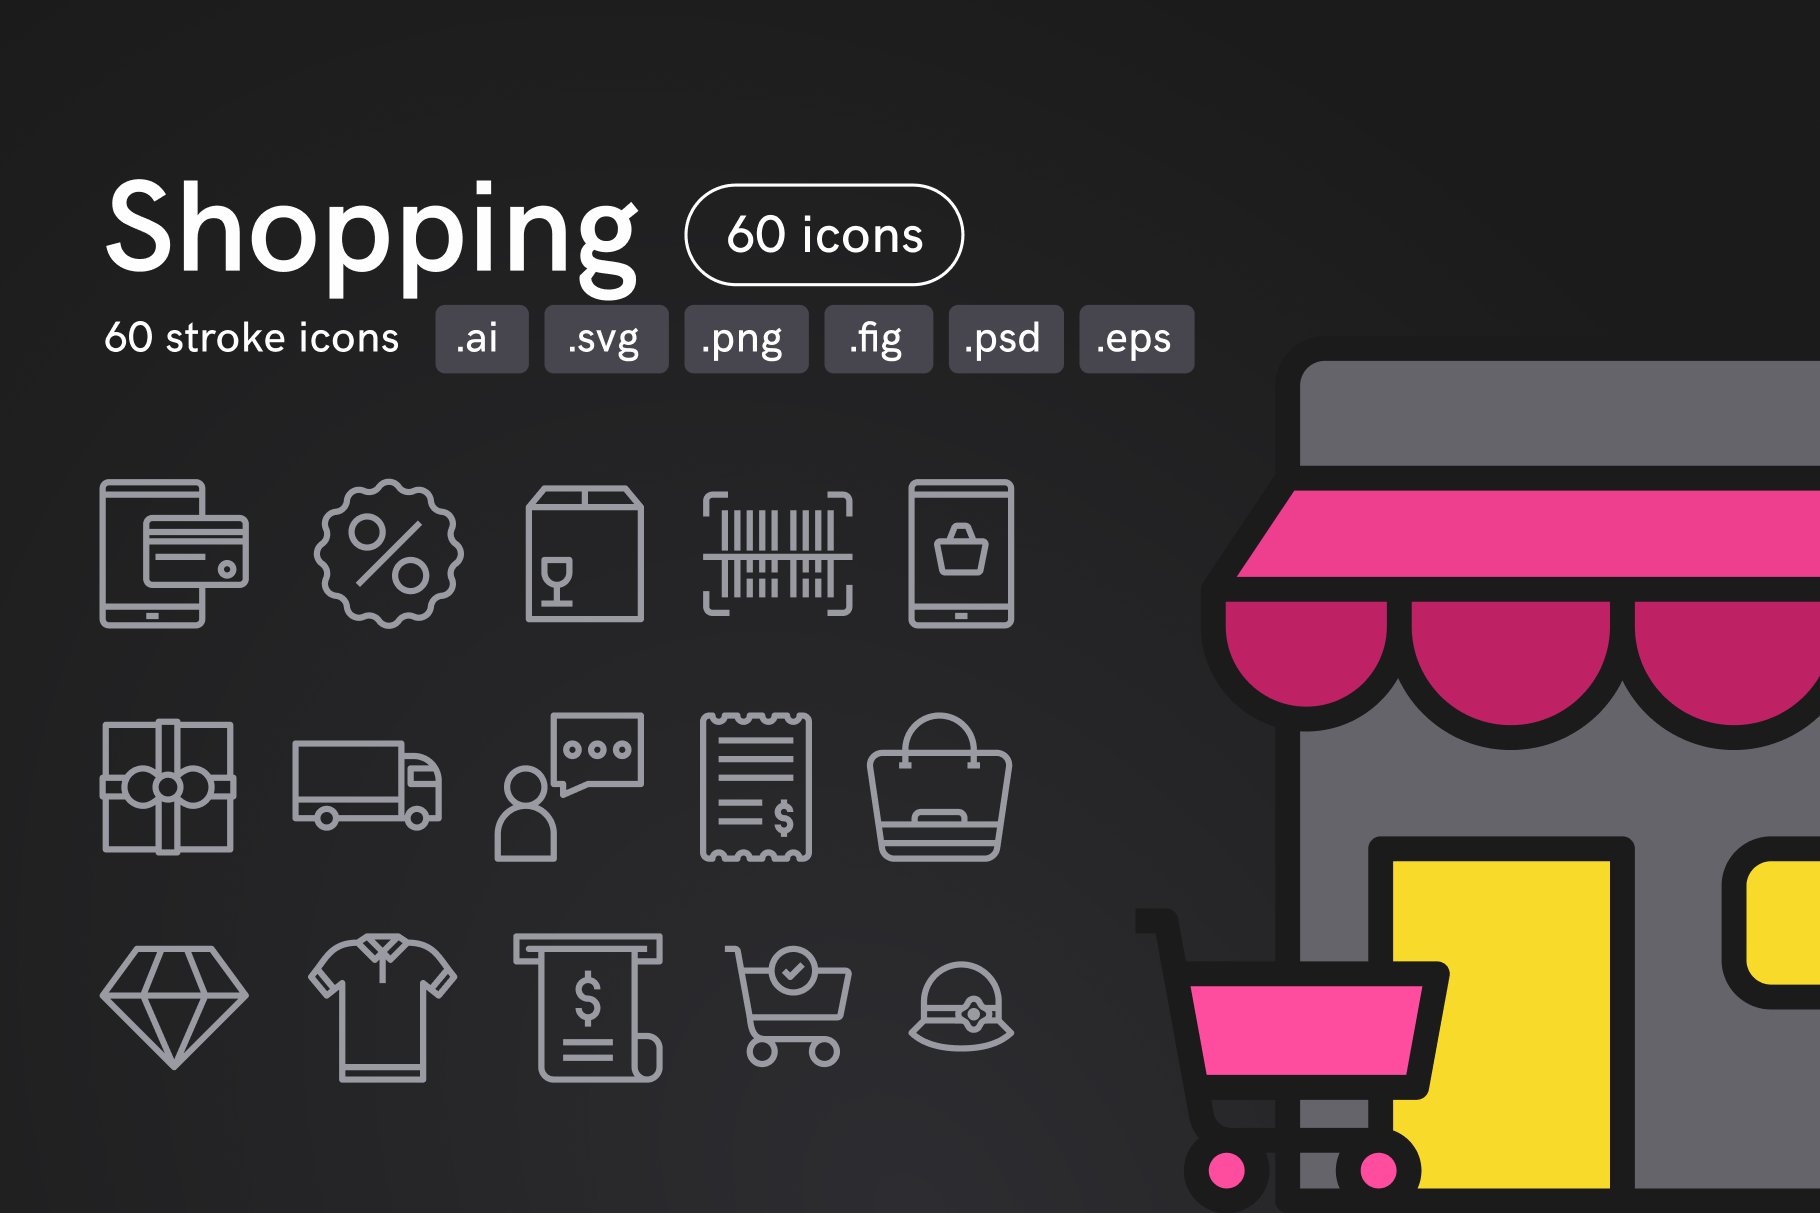 Shopping Icons cover image.